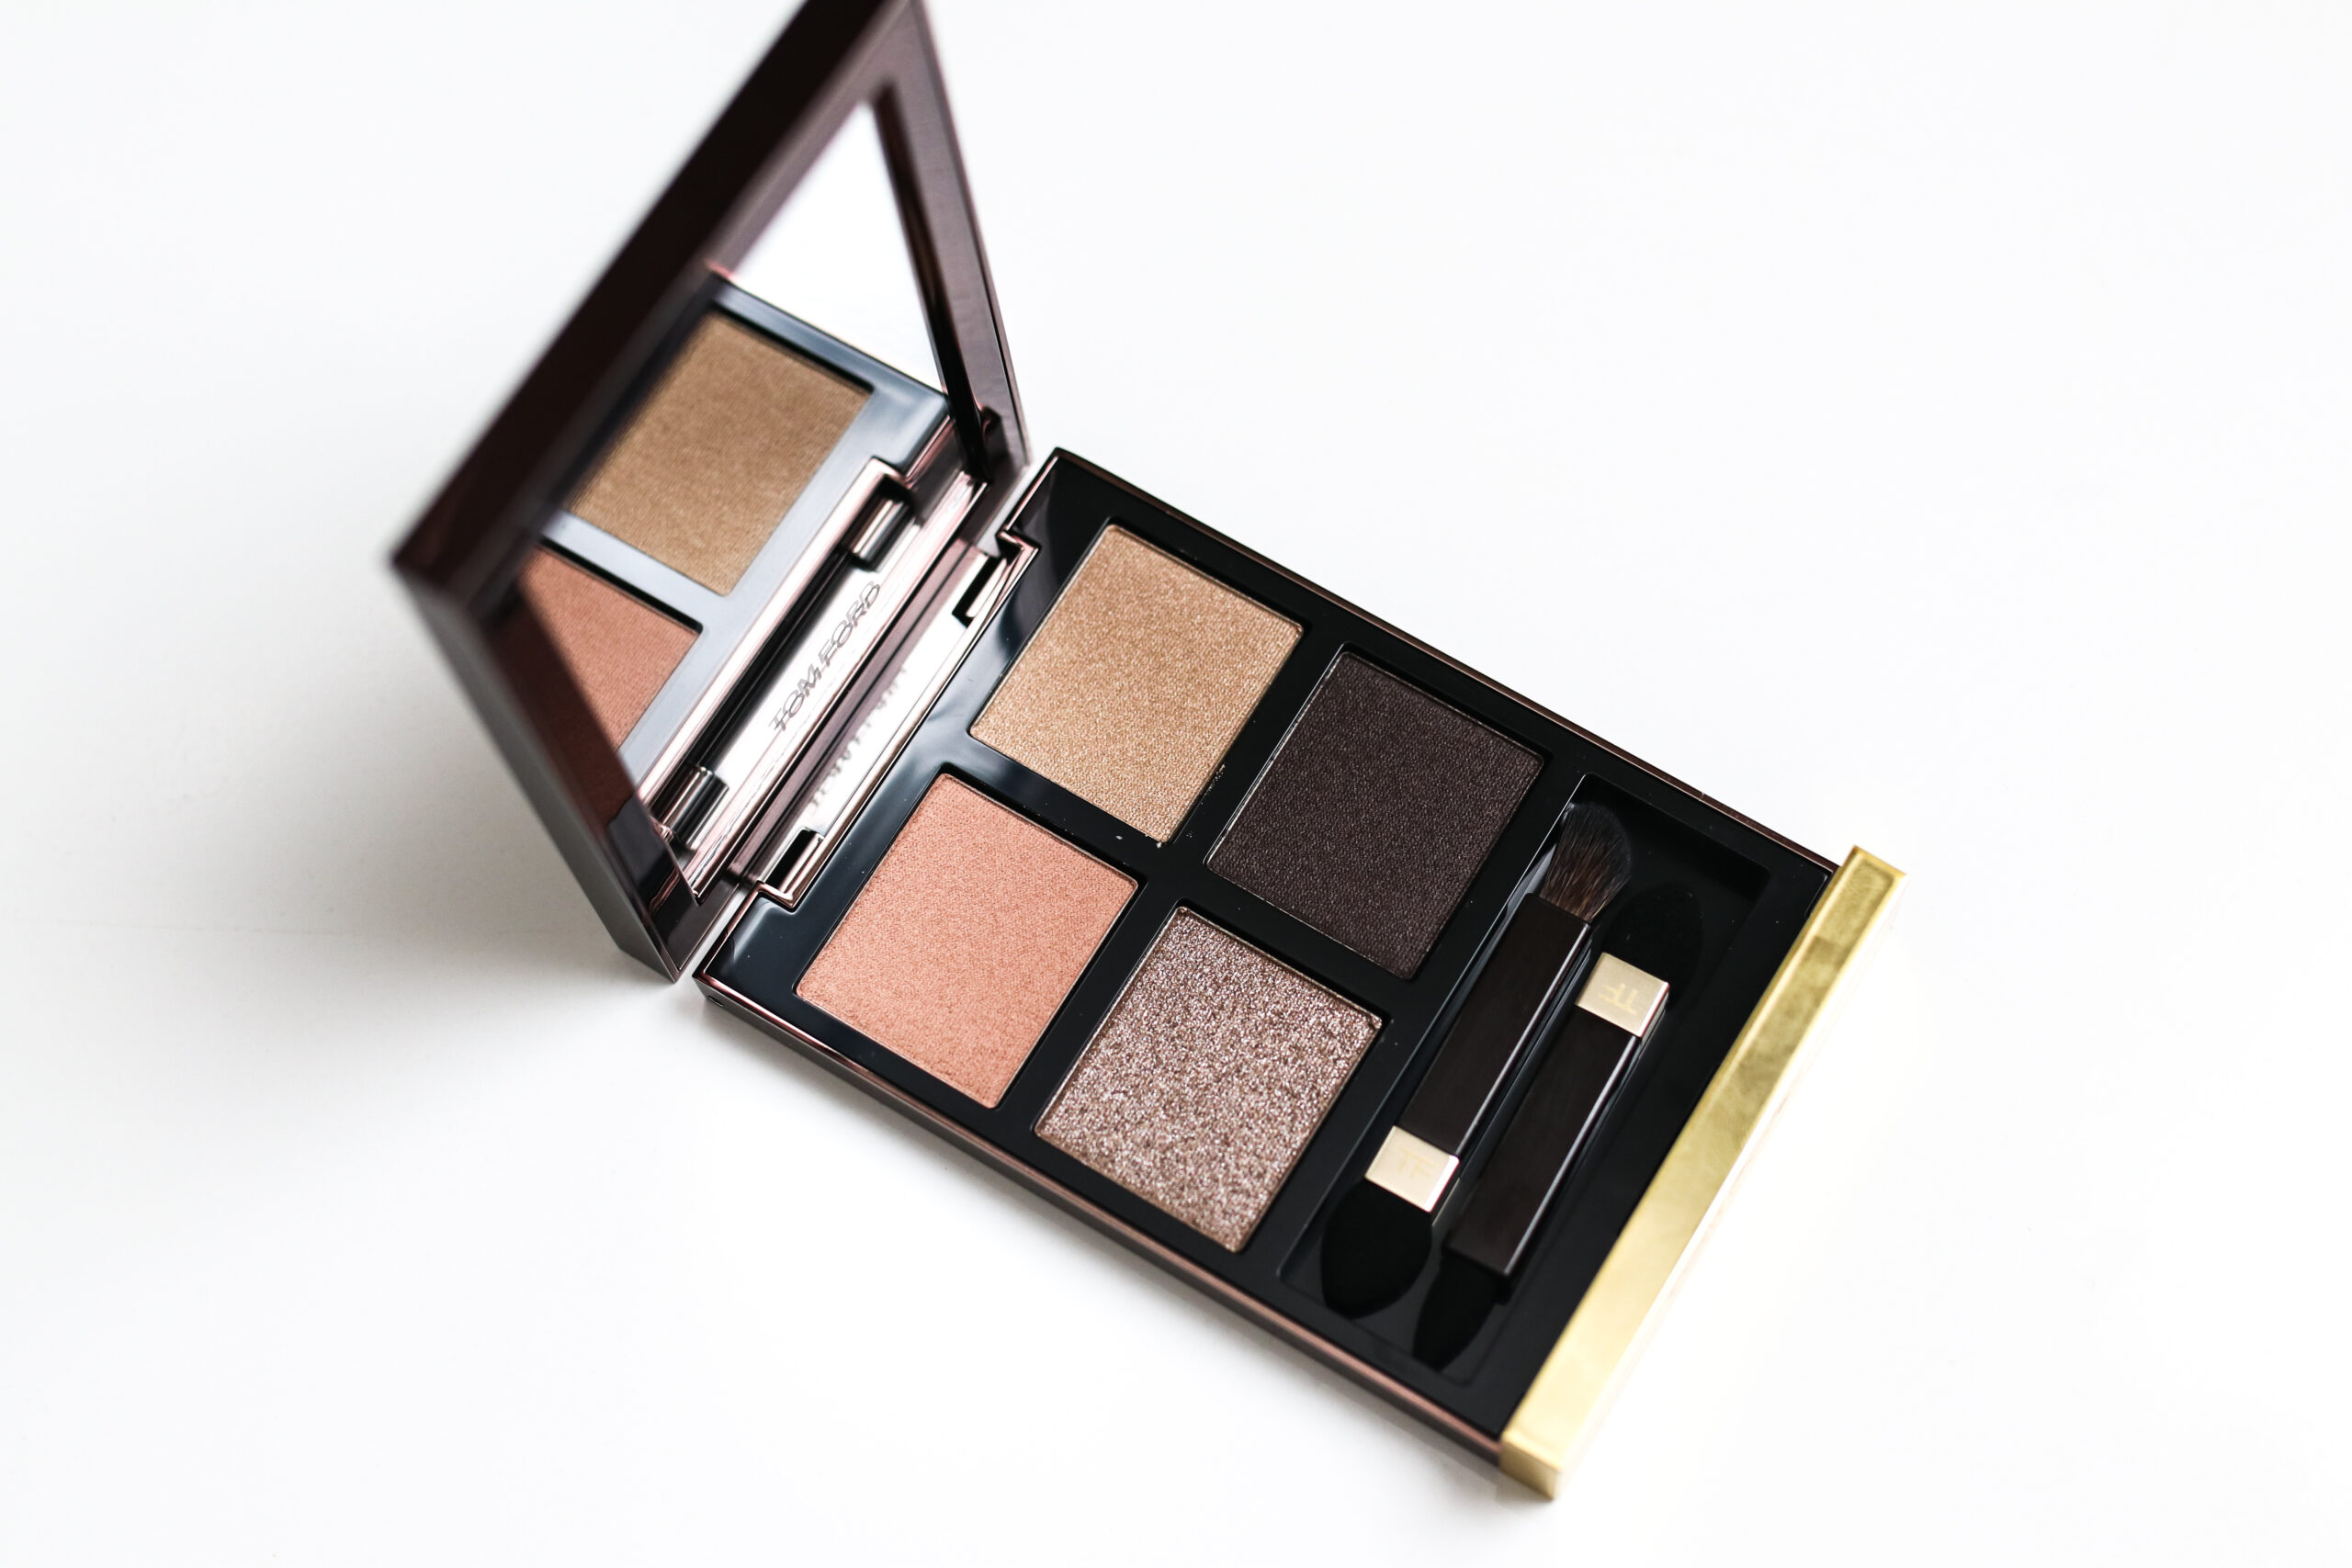 Review + Swatches: Tom Ford Creme Eye Quad in Rose Topaz | alittlebitetc